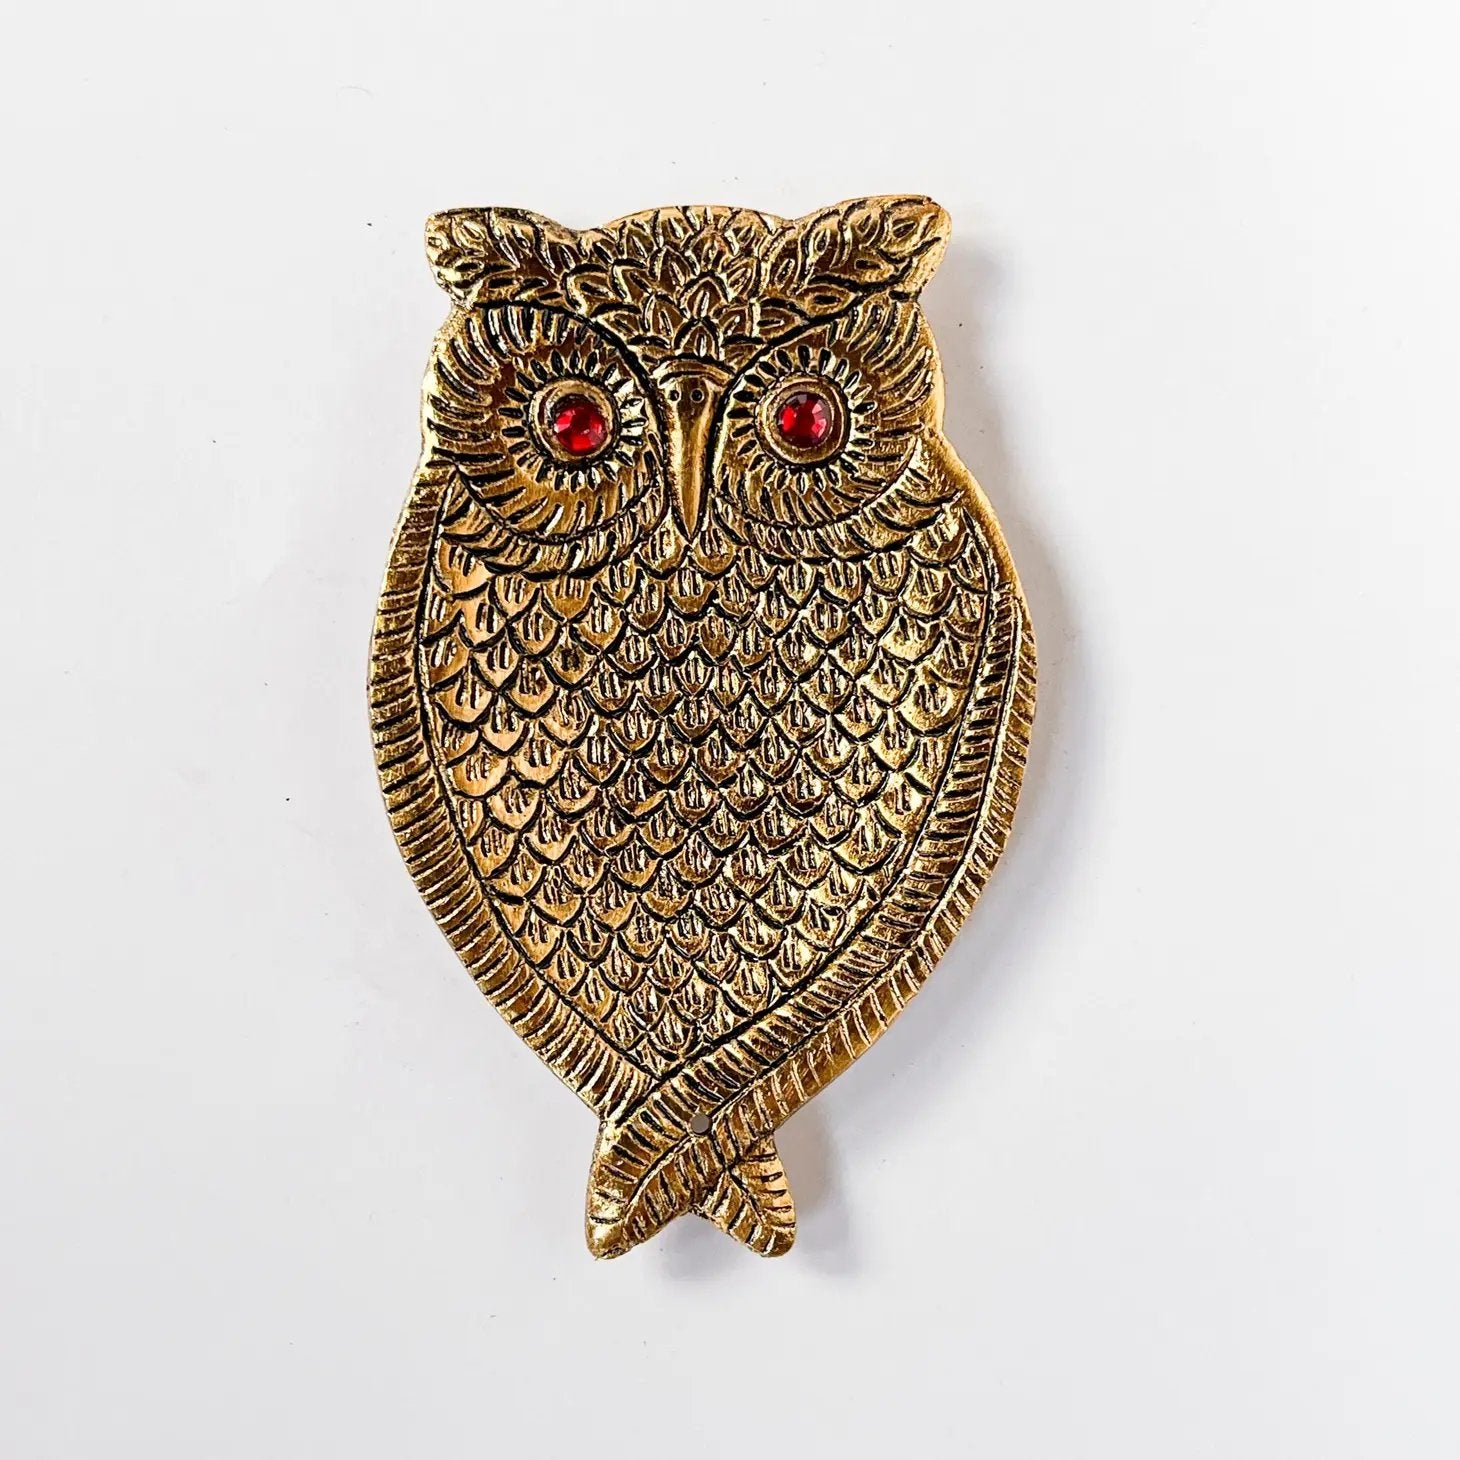 Owl Incense Holder (Gold with Red Eyes) - Incense Holders